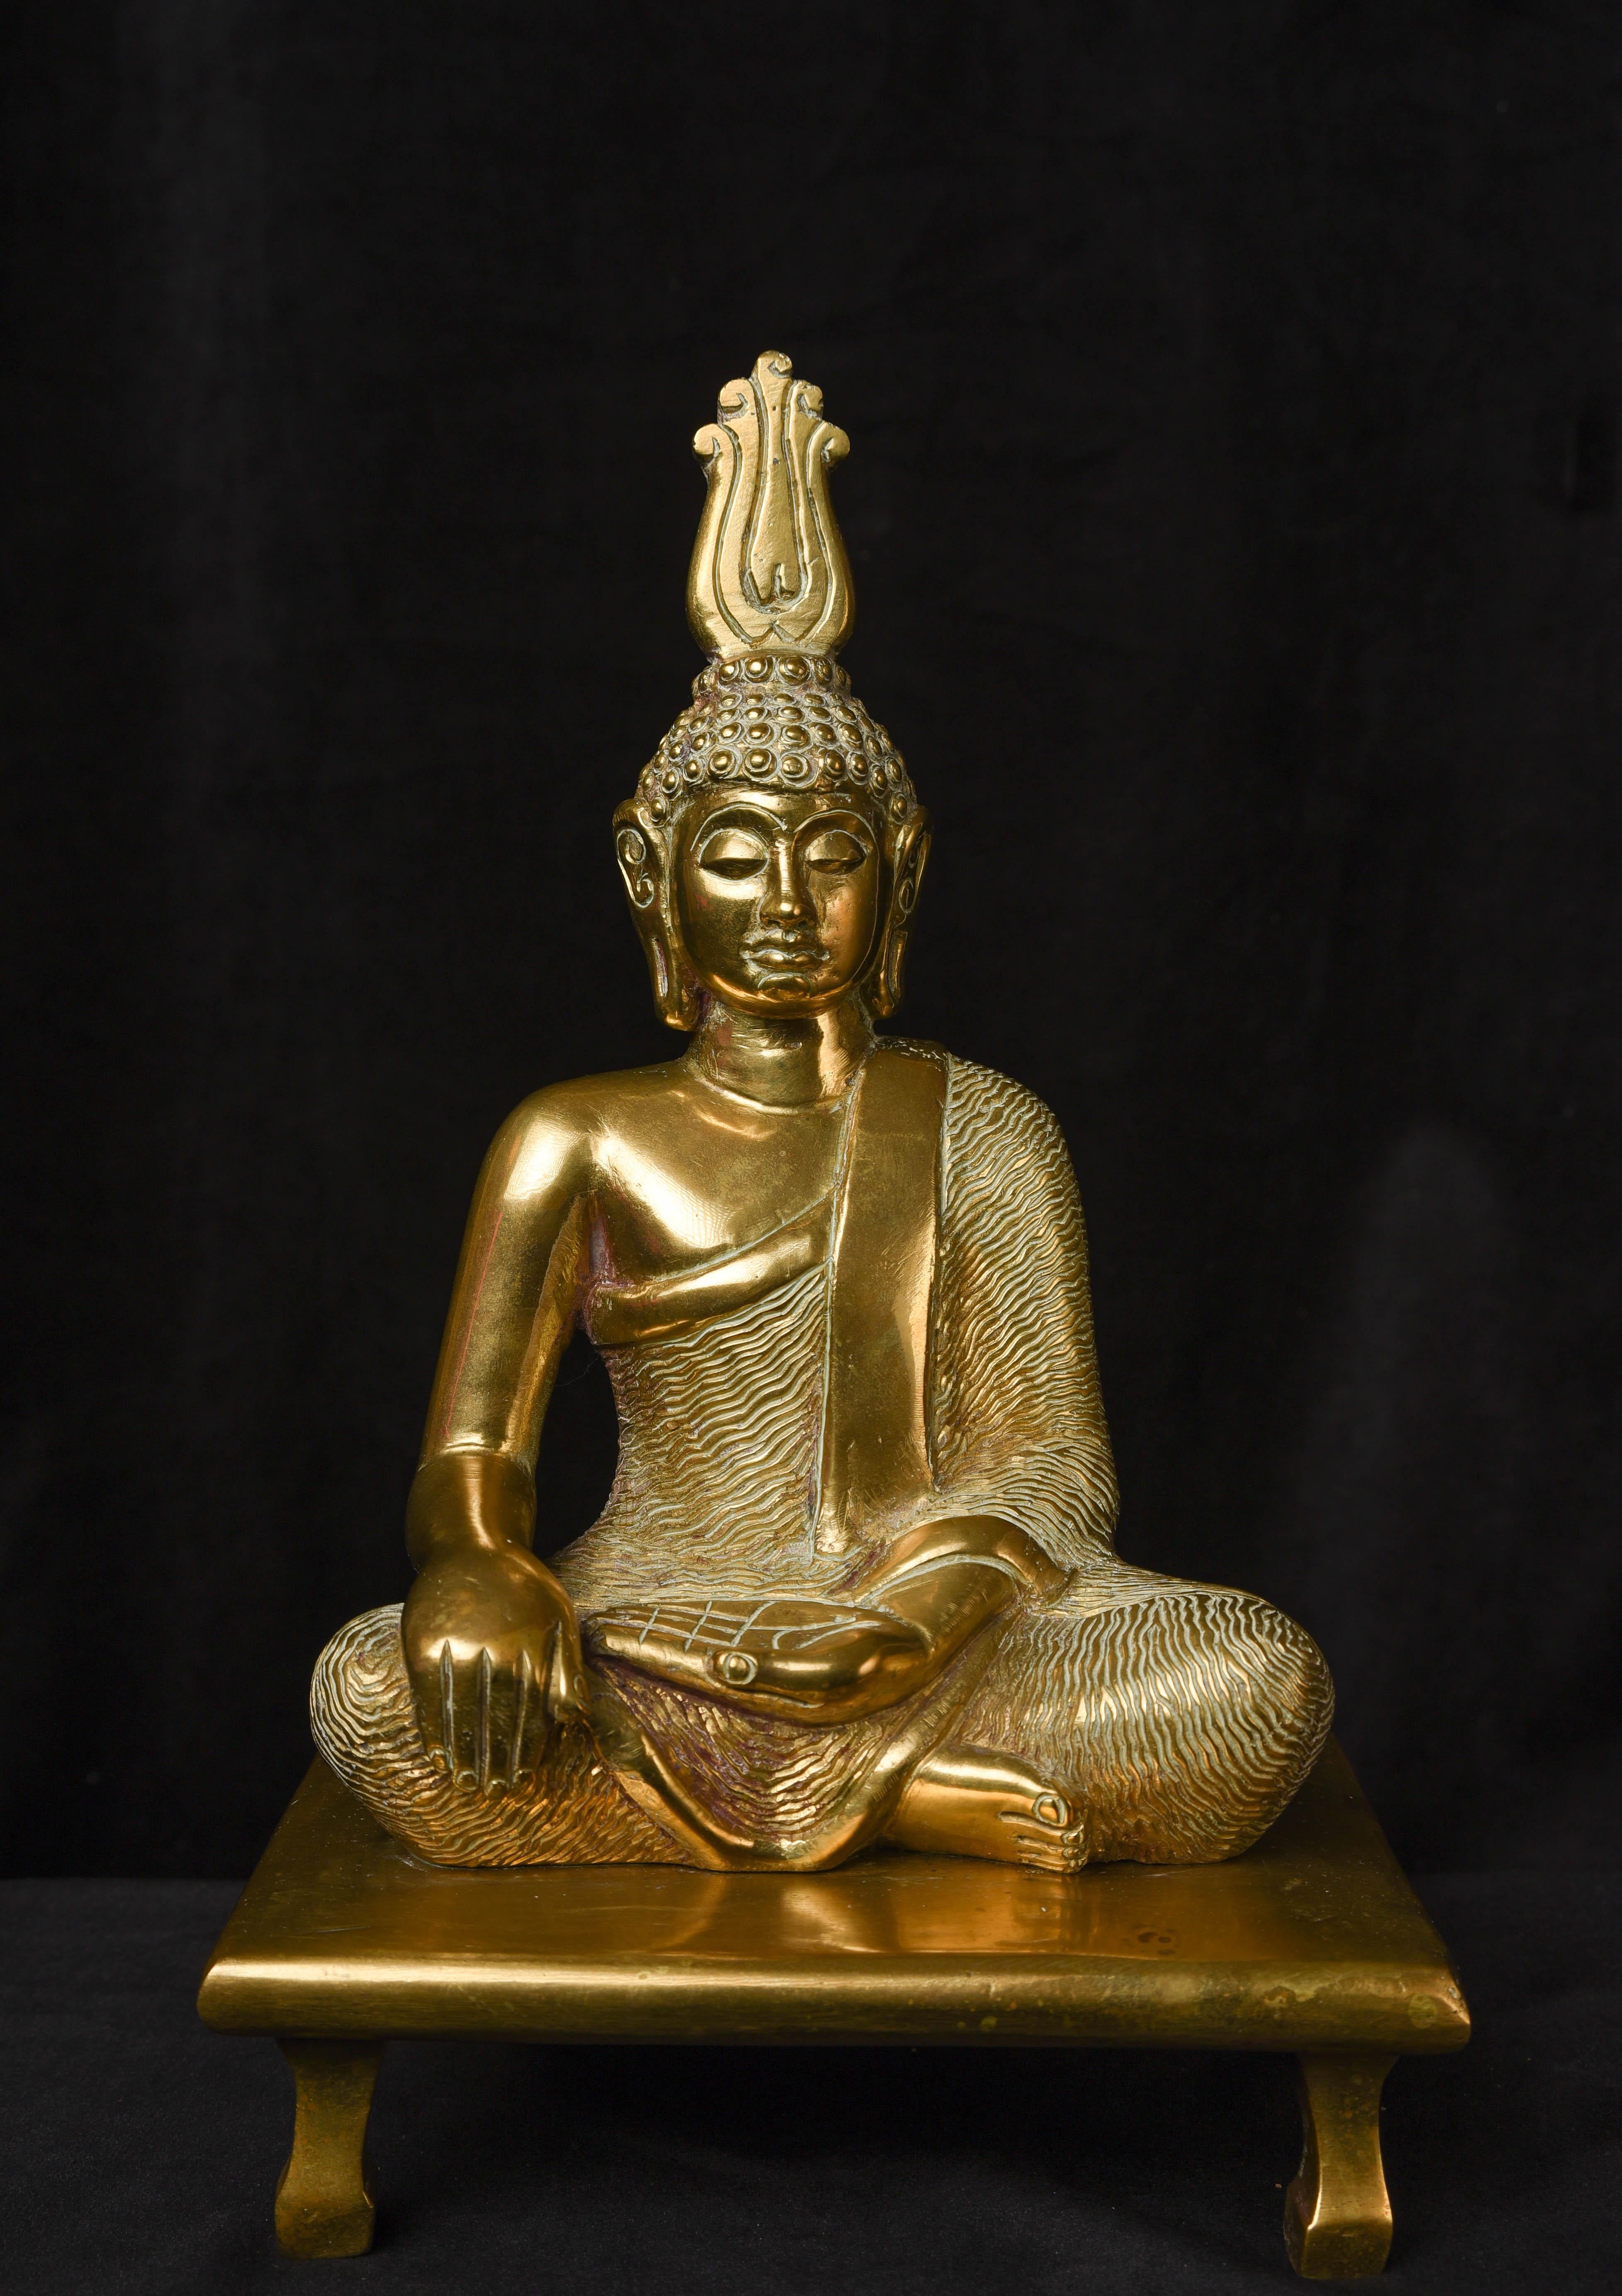 Large Sri Lankan Buddha- almost glows in the dark. Very well cast and finished. Large at 11